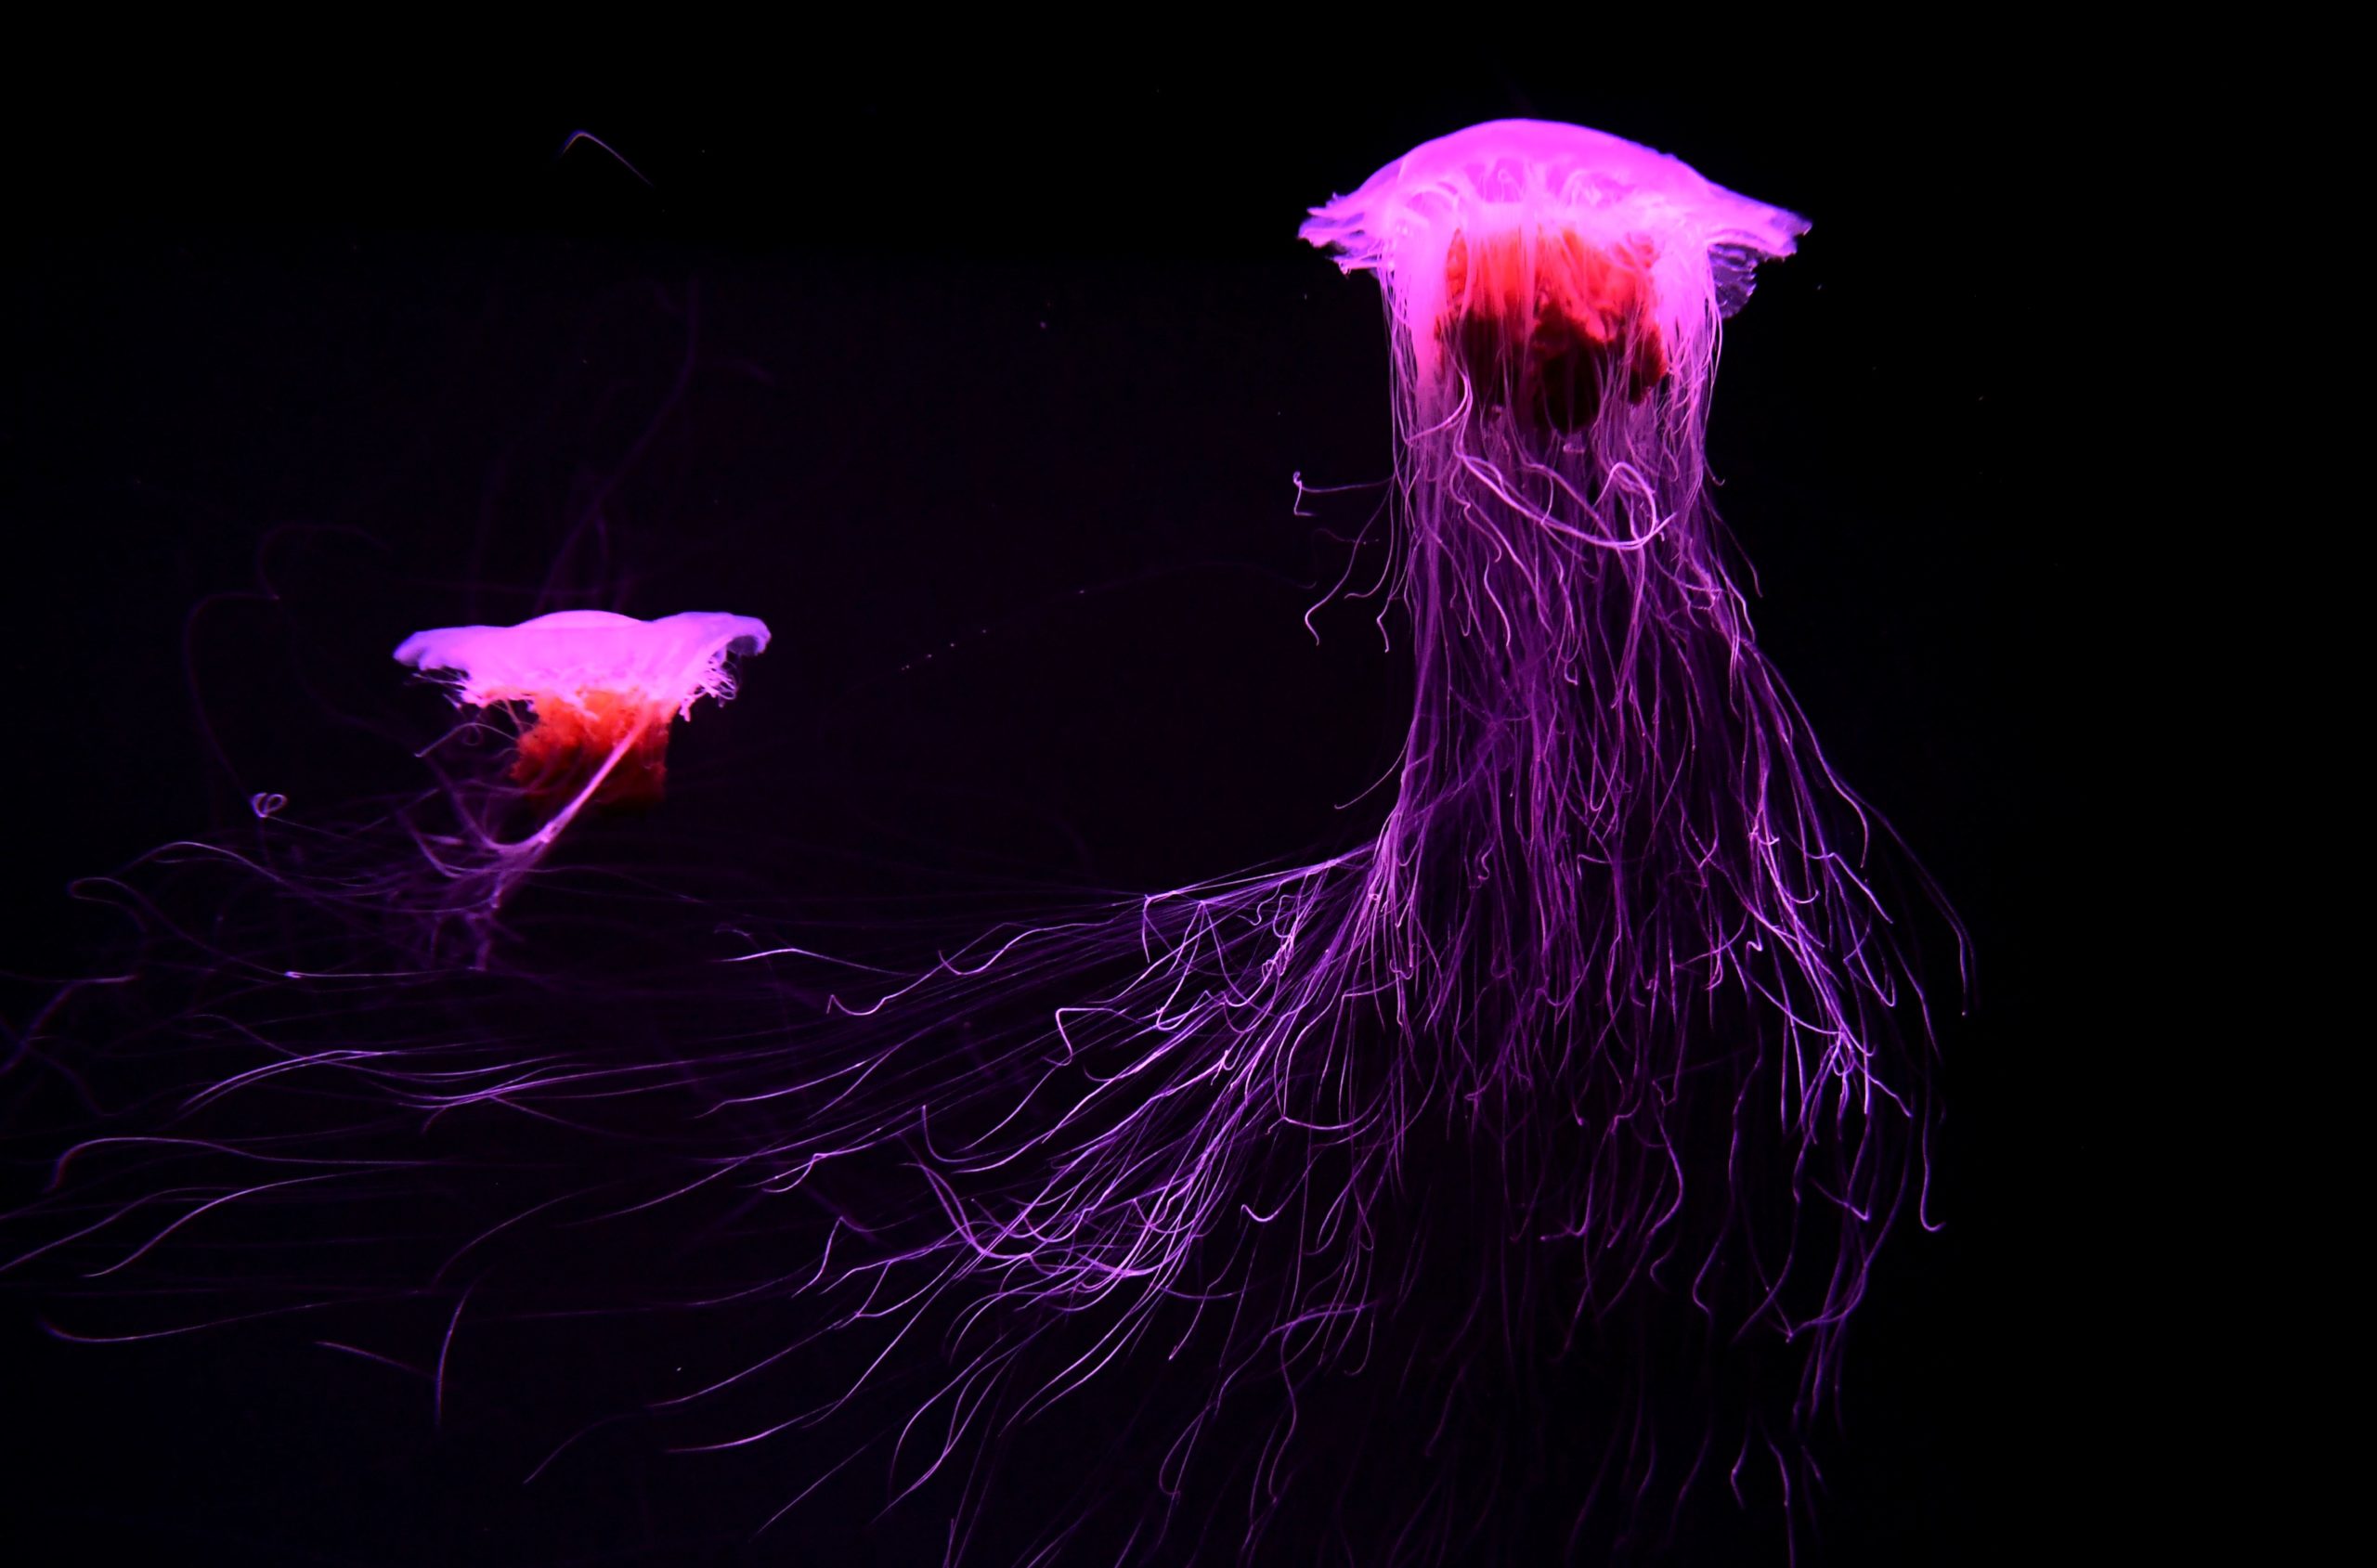 Lovely lion's mane jellyfish swim in their display tank at Sea Life Melbourne Aqaurium in Melbourne on May 26, 2020. (Photo: William West, Getty Images)